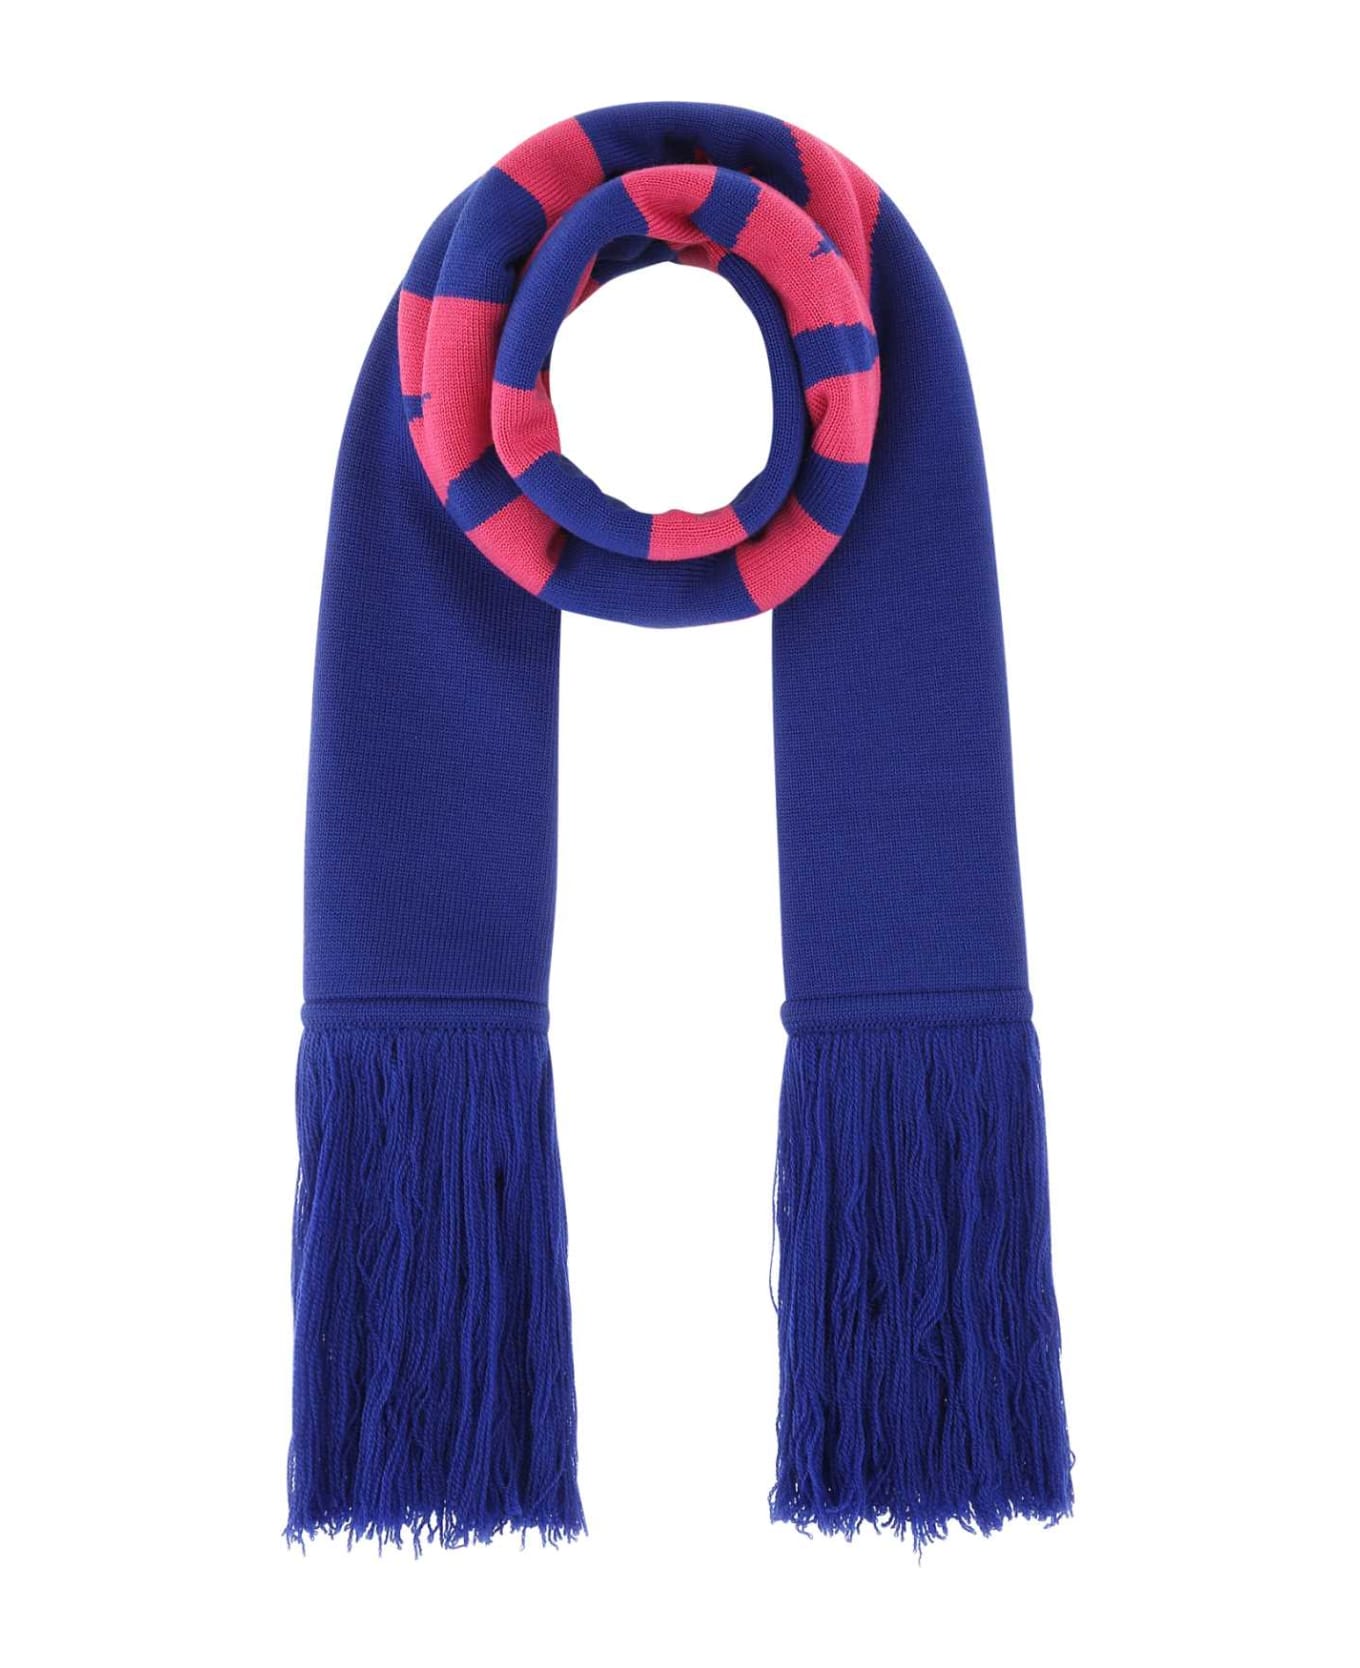 VETEMENTS Embroidered Wool Scarf - ROYALBLUE スカーフ